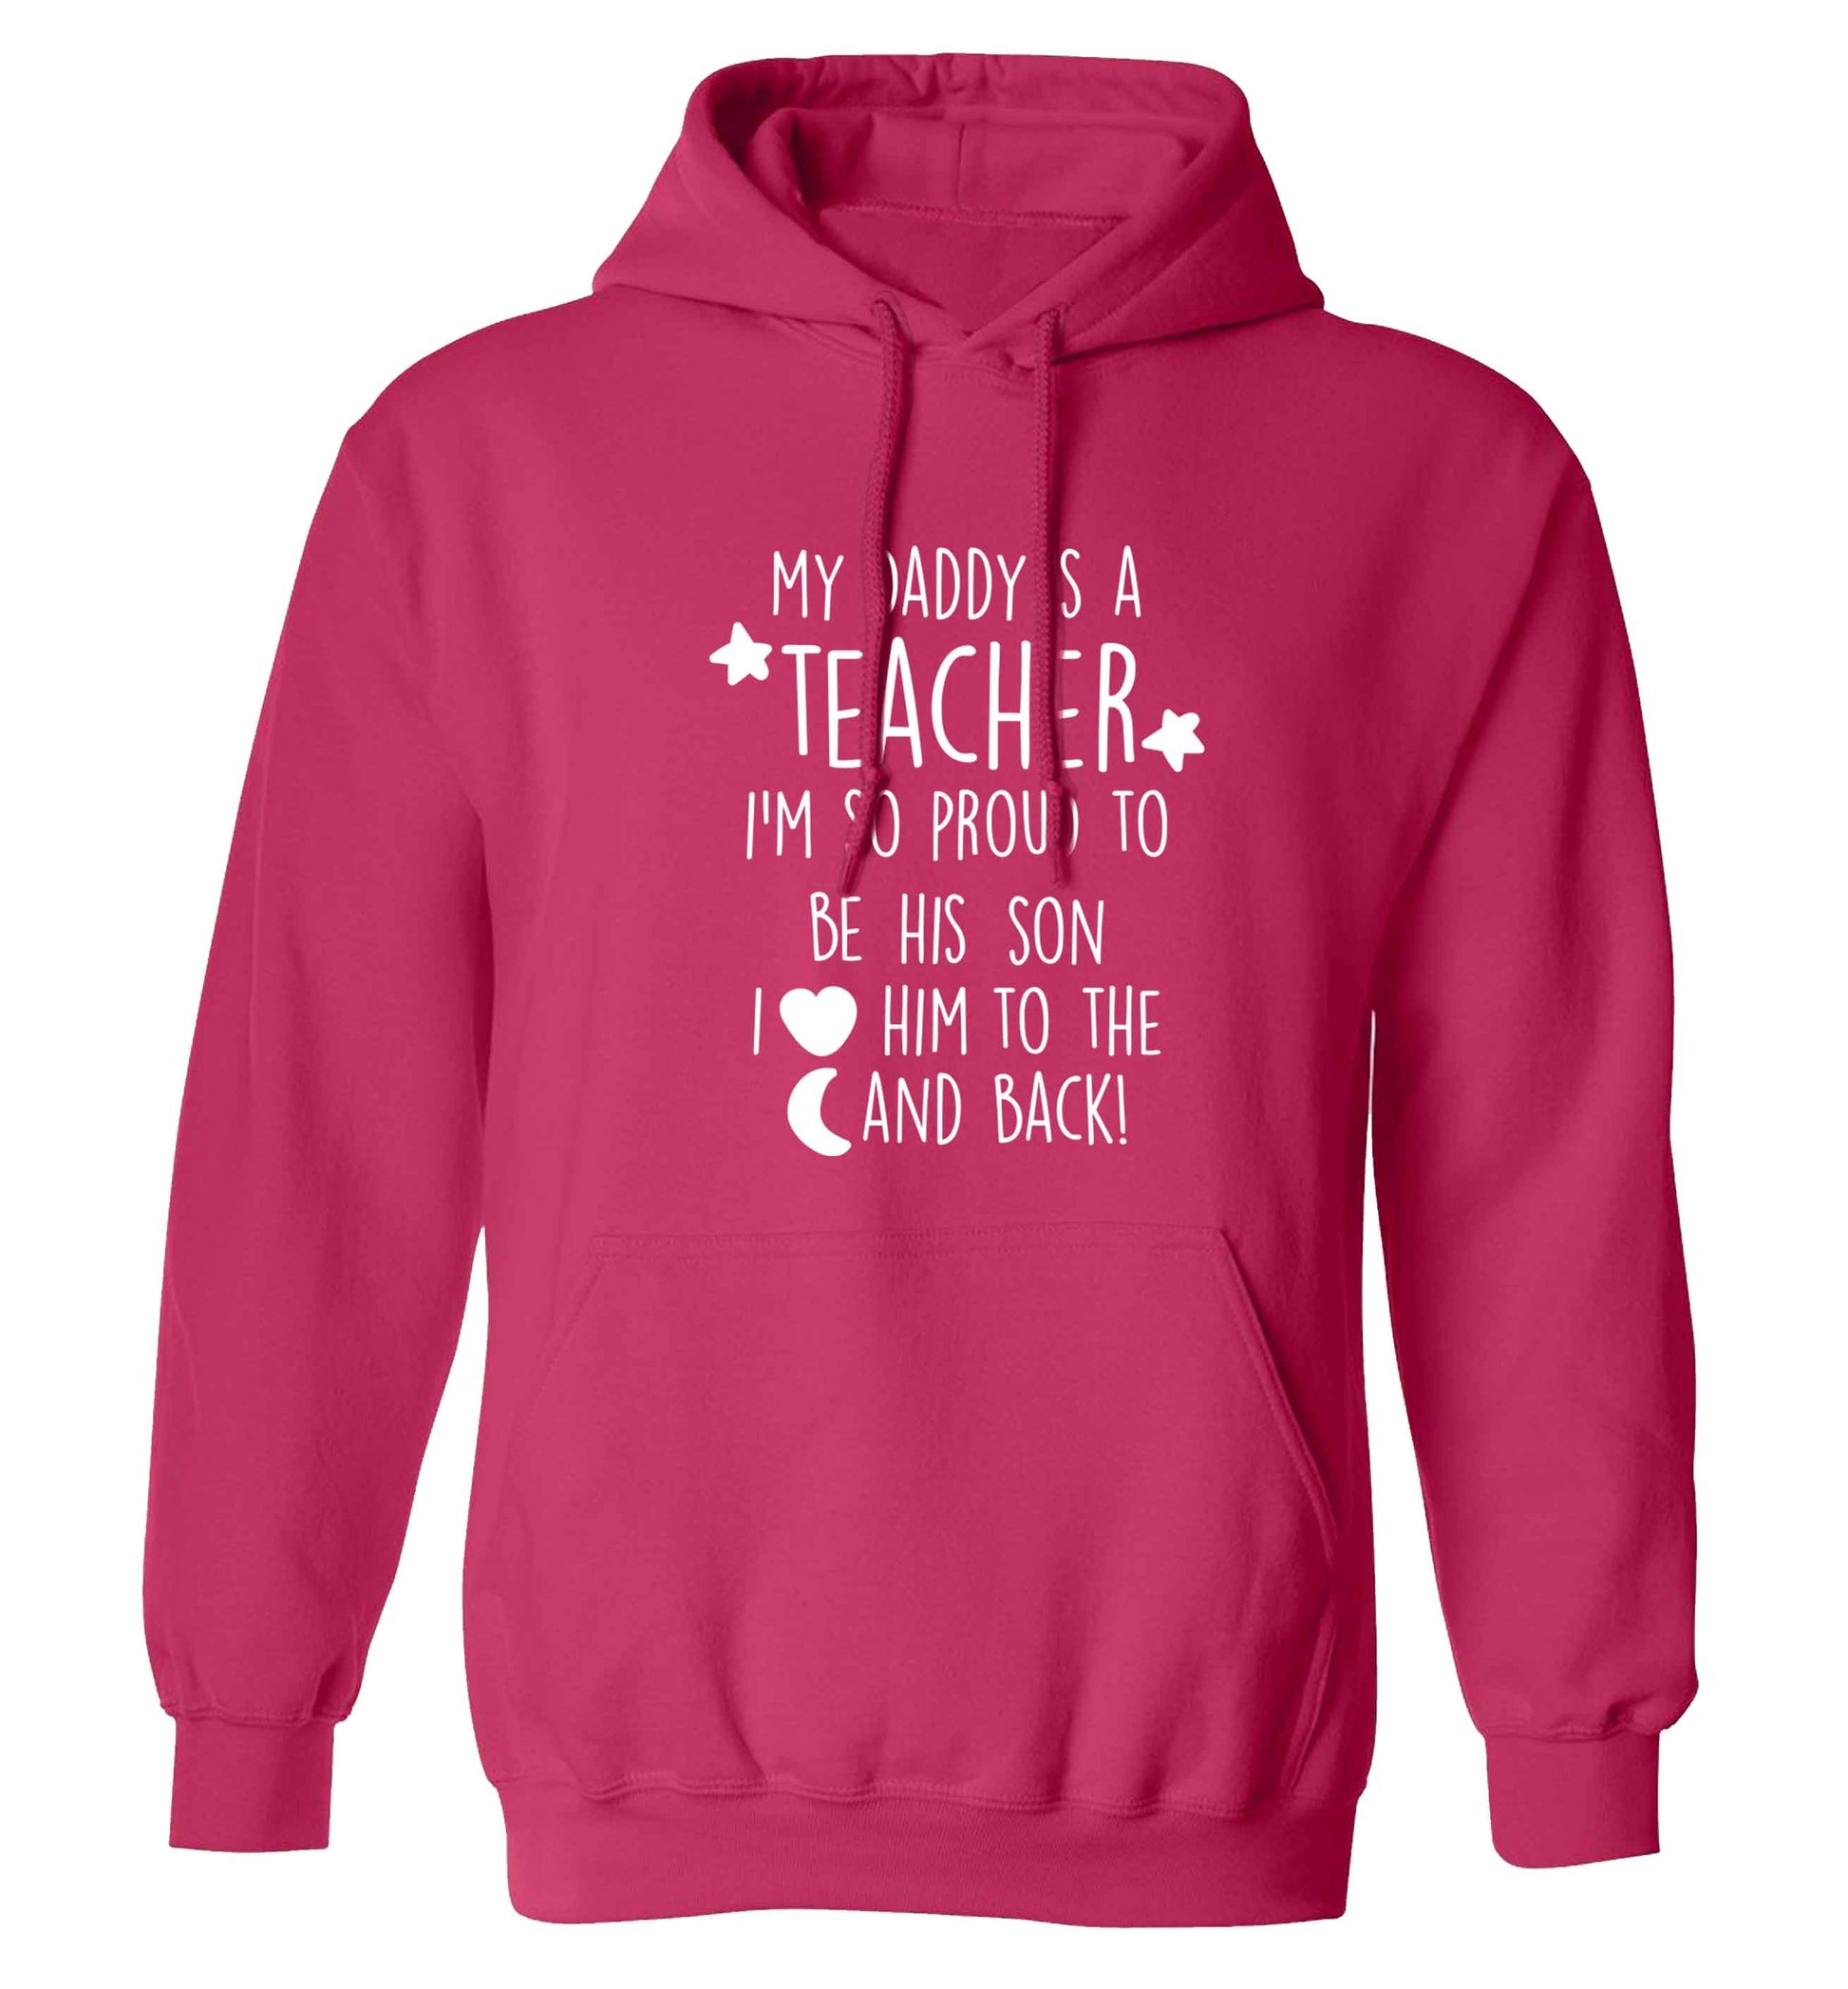 My daddy is a teacher I'm so proud to be his son I love her to the moon and back adults unisex pink hoodie 2XL